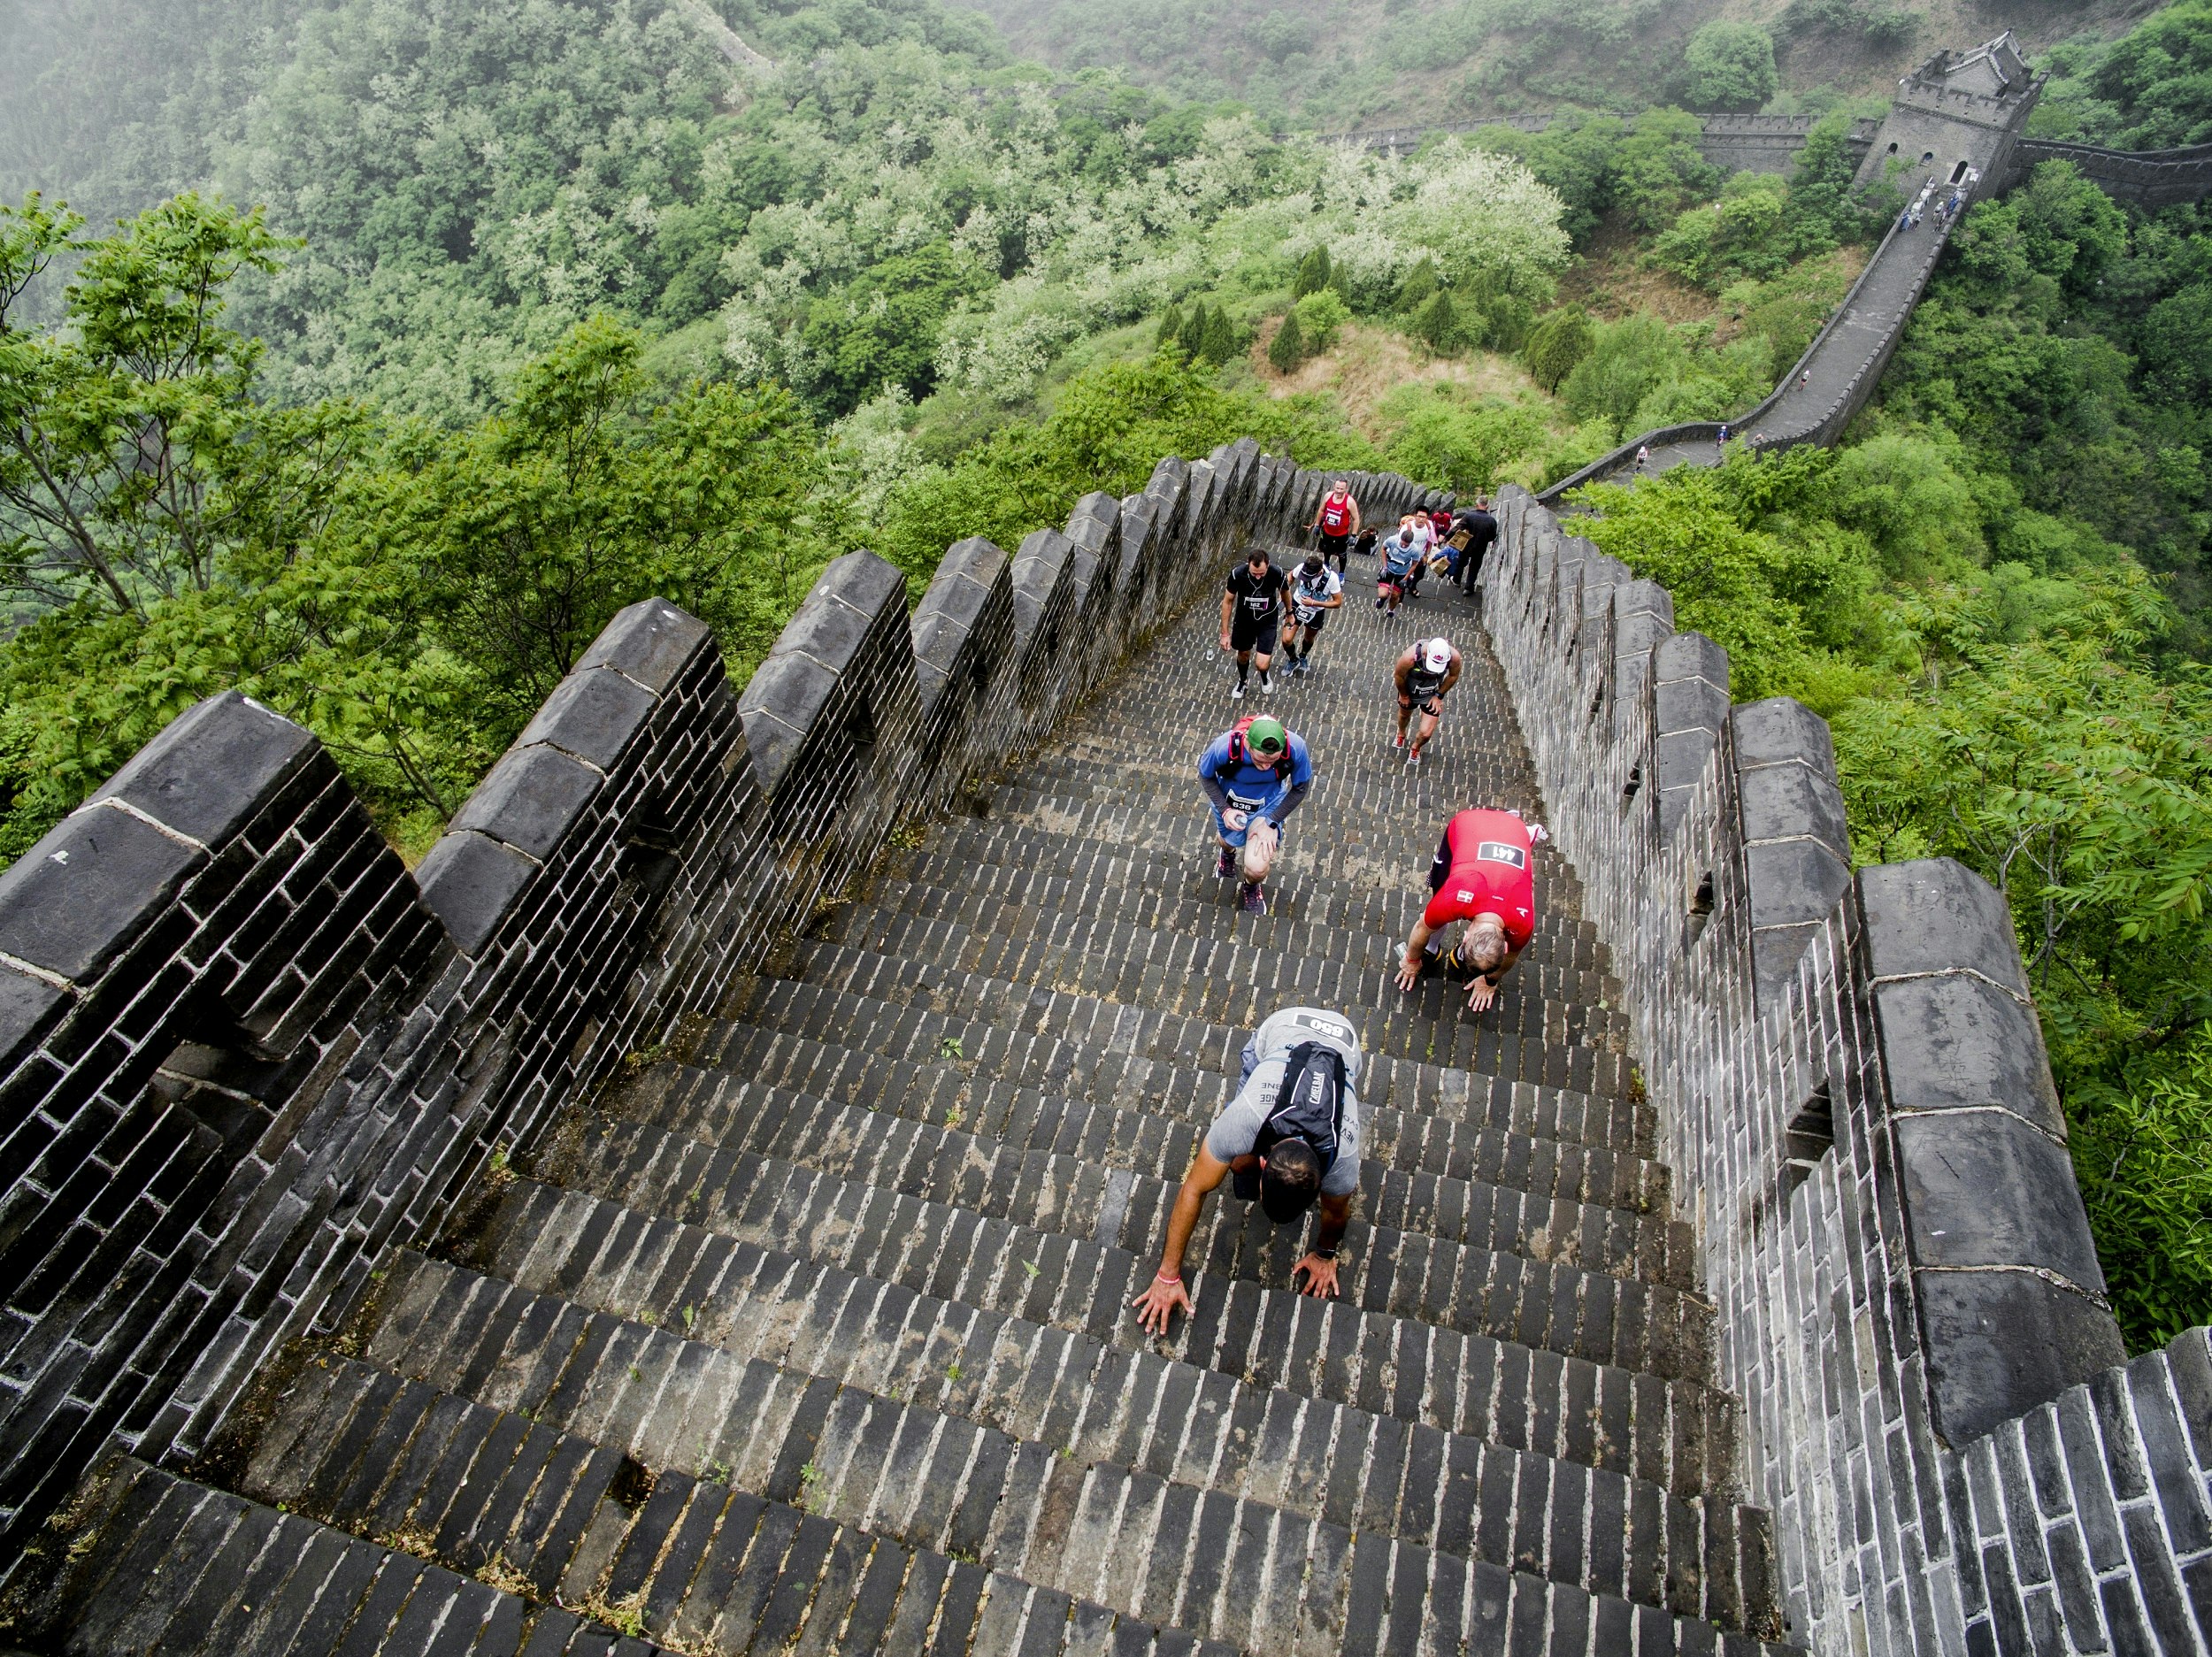 Competitors clamber up a steep section of steps on the Great Wall of China during the marathon; the wall descends behind them into the distance, with trees on each side of it.